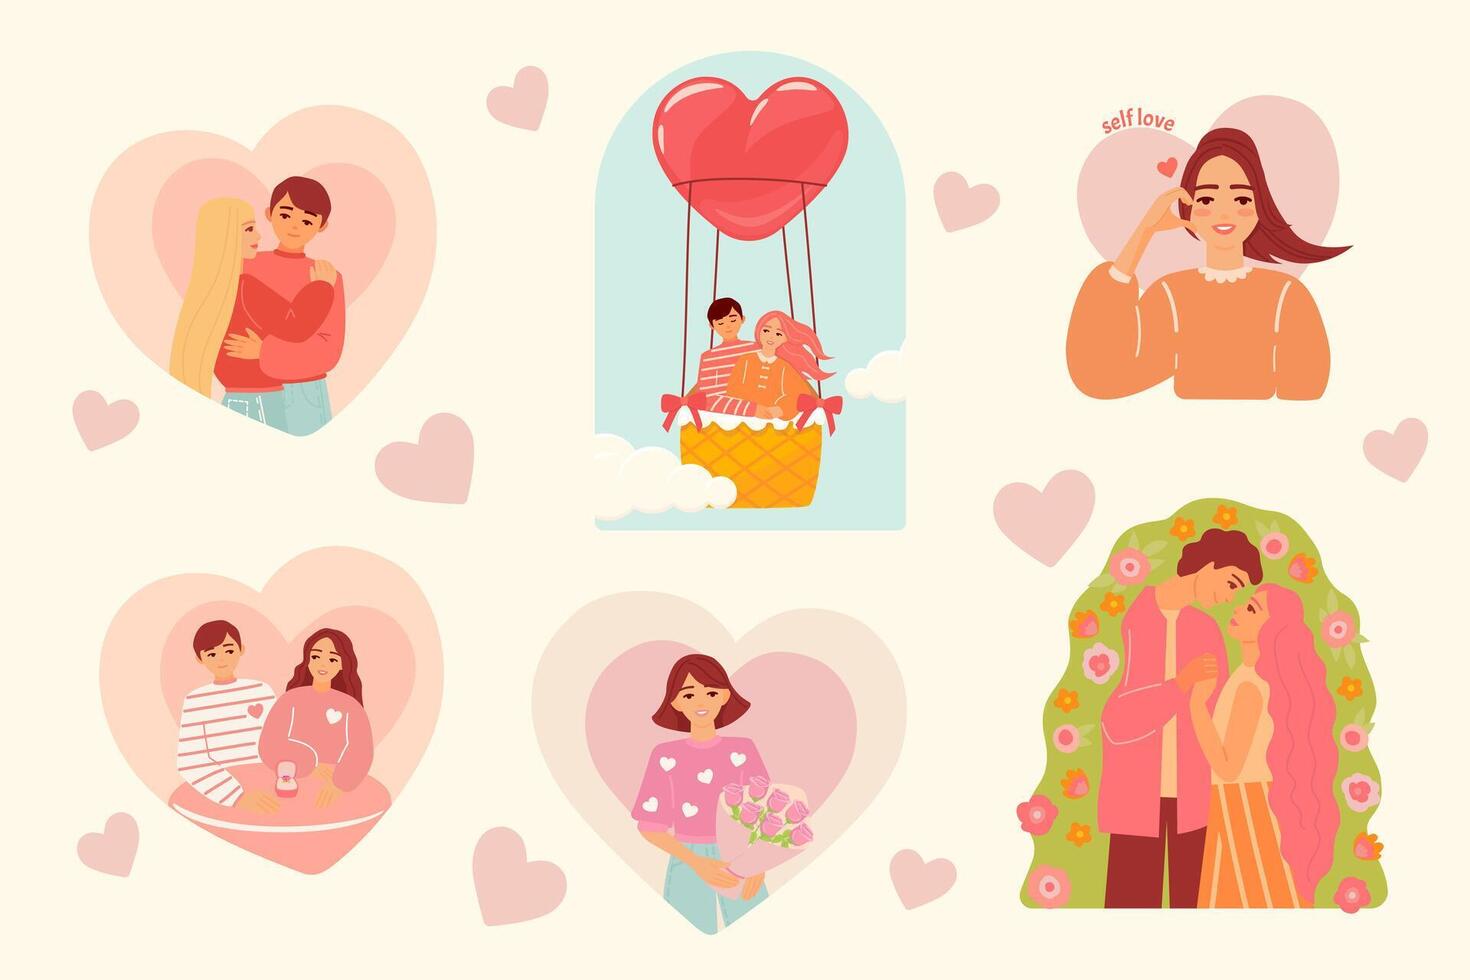 Valentine's day set with beautiful couples of young woman and man holding embracing each other. Cartoon illustration of people dating and in love vector